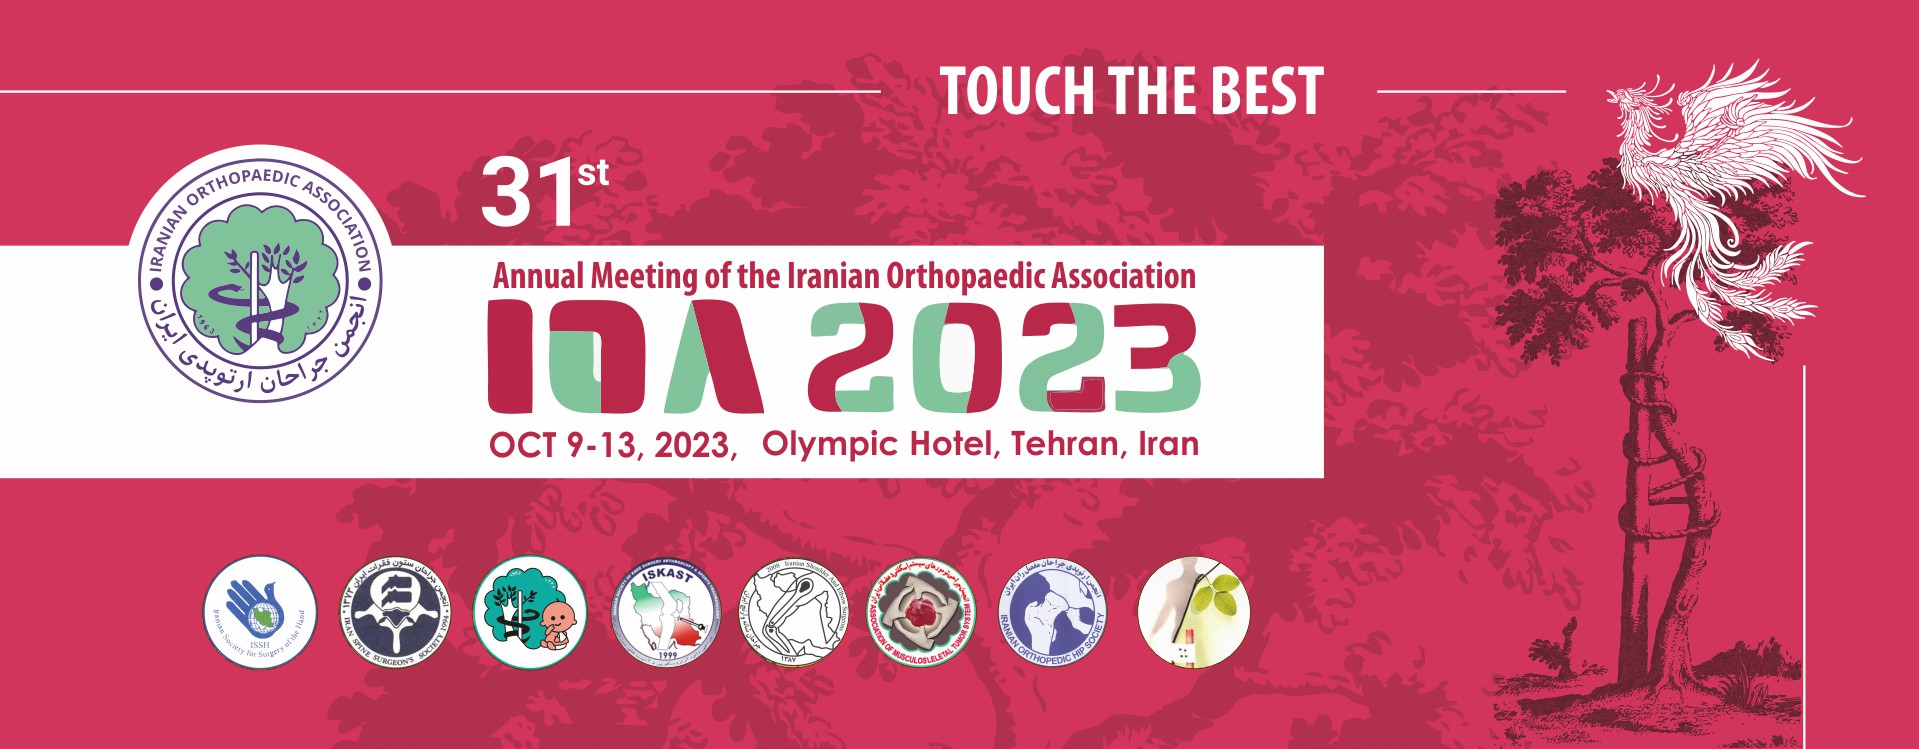 31st Annual Meeting Of The Iranian Orthopaedic Association